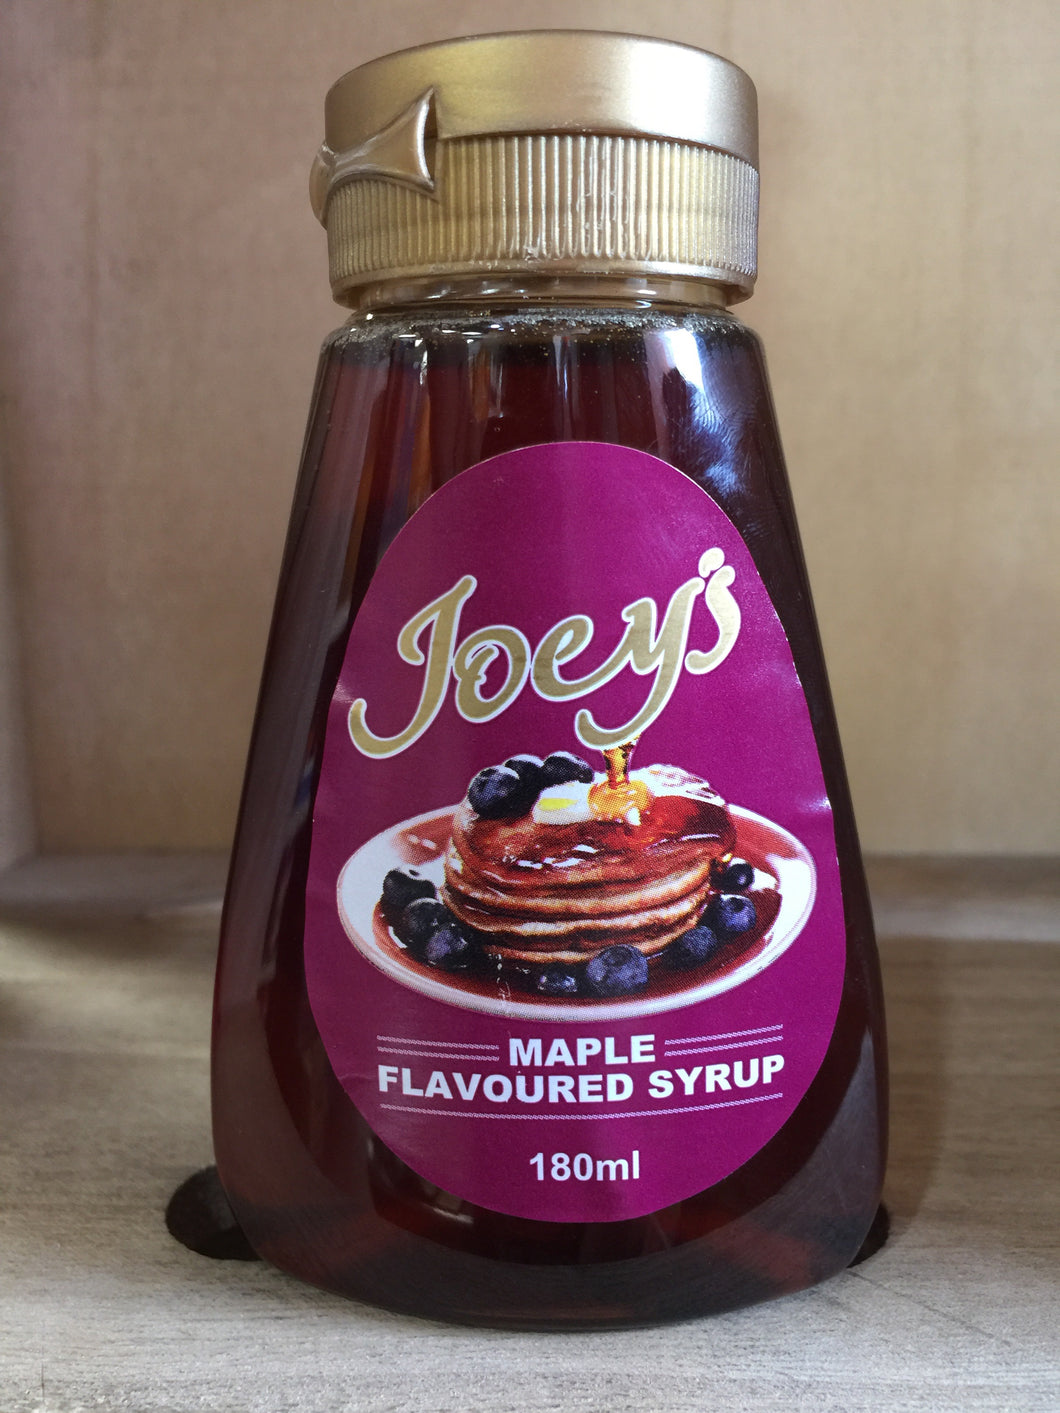 Joey's Maple Flavoured Syrup 180ml